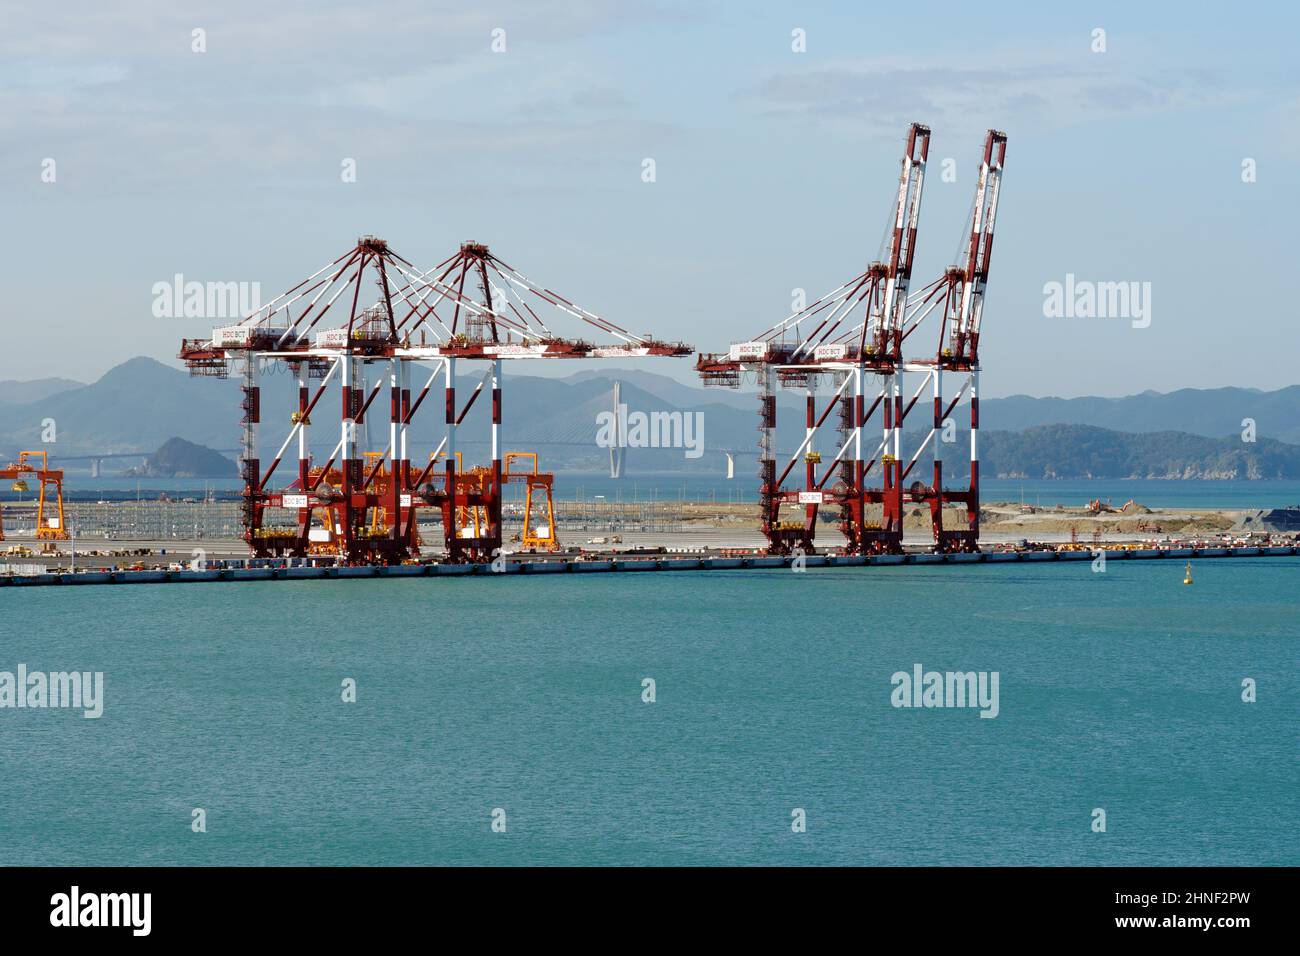 Red gantry cranes with white stripes in container terminal under construction in Busan New Port. Stock Photo